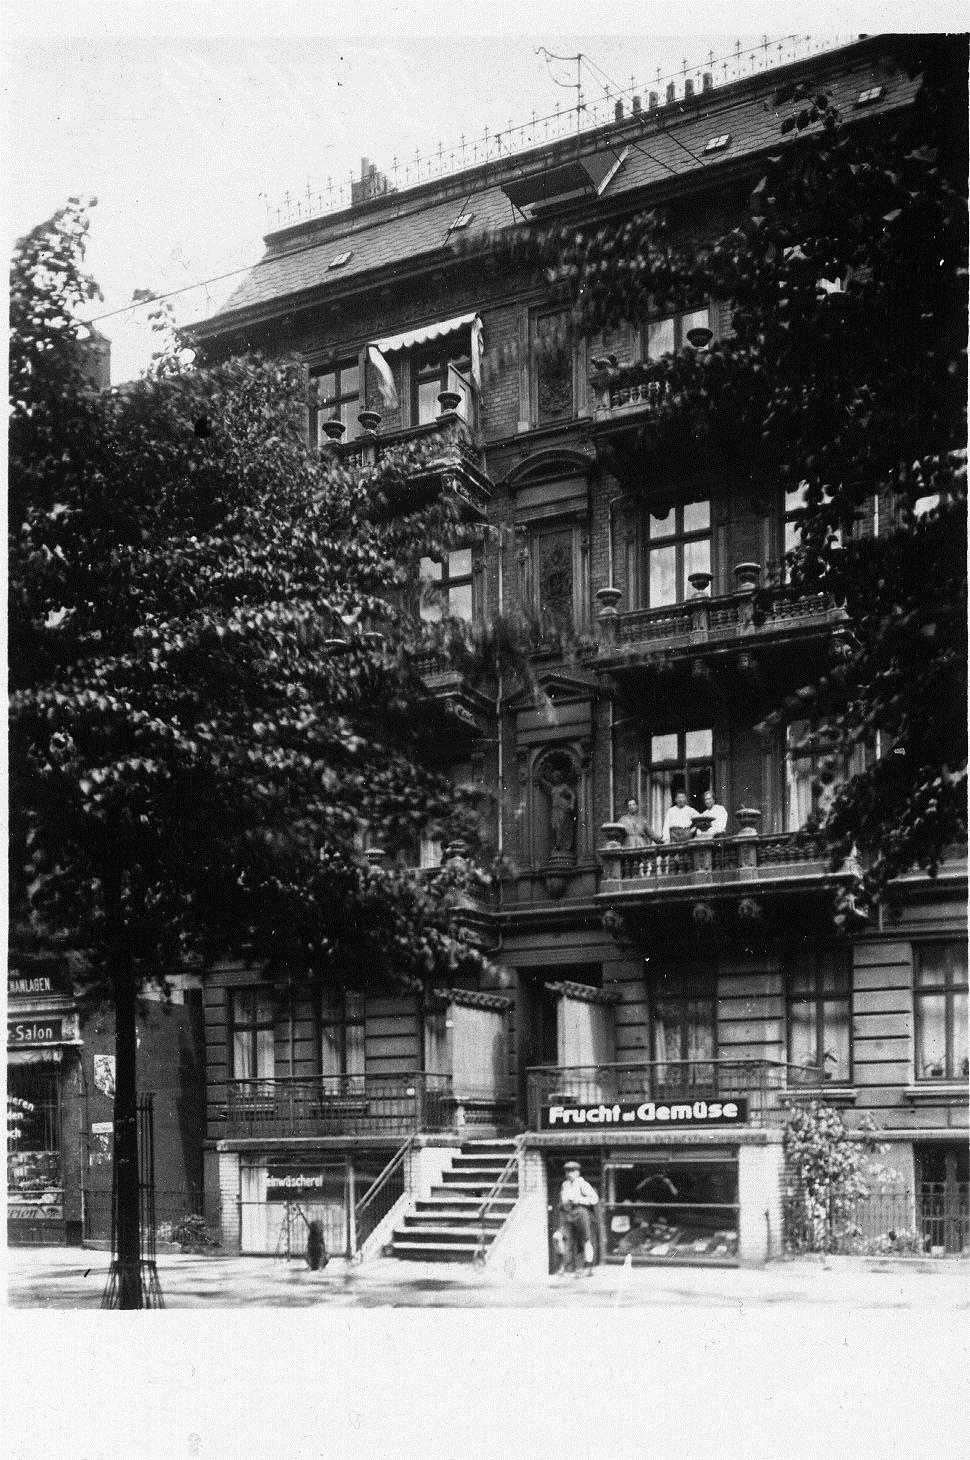 The house where my father grew up no longer exists today. In Eppendorfer Route 40 is instead an anonymous grass surface. On the photo you see the balcony (above the fruit and vegetable business Barehsel and adjacent to the niche with the small statue), where the conscious life of my father in Minna's arms and with Gustav and his brothers began.